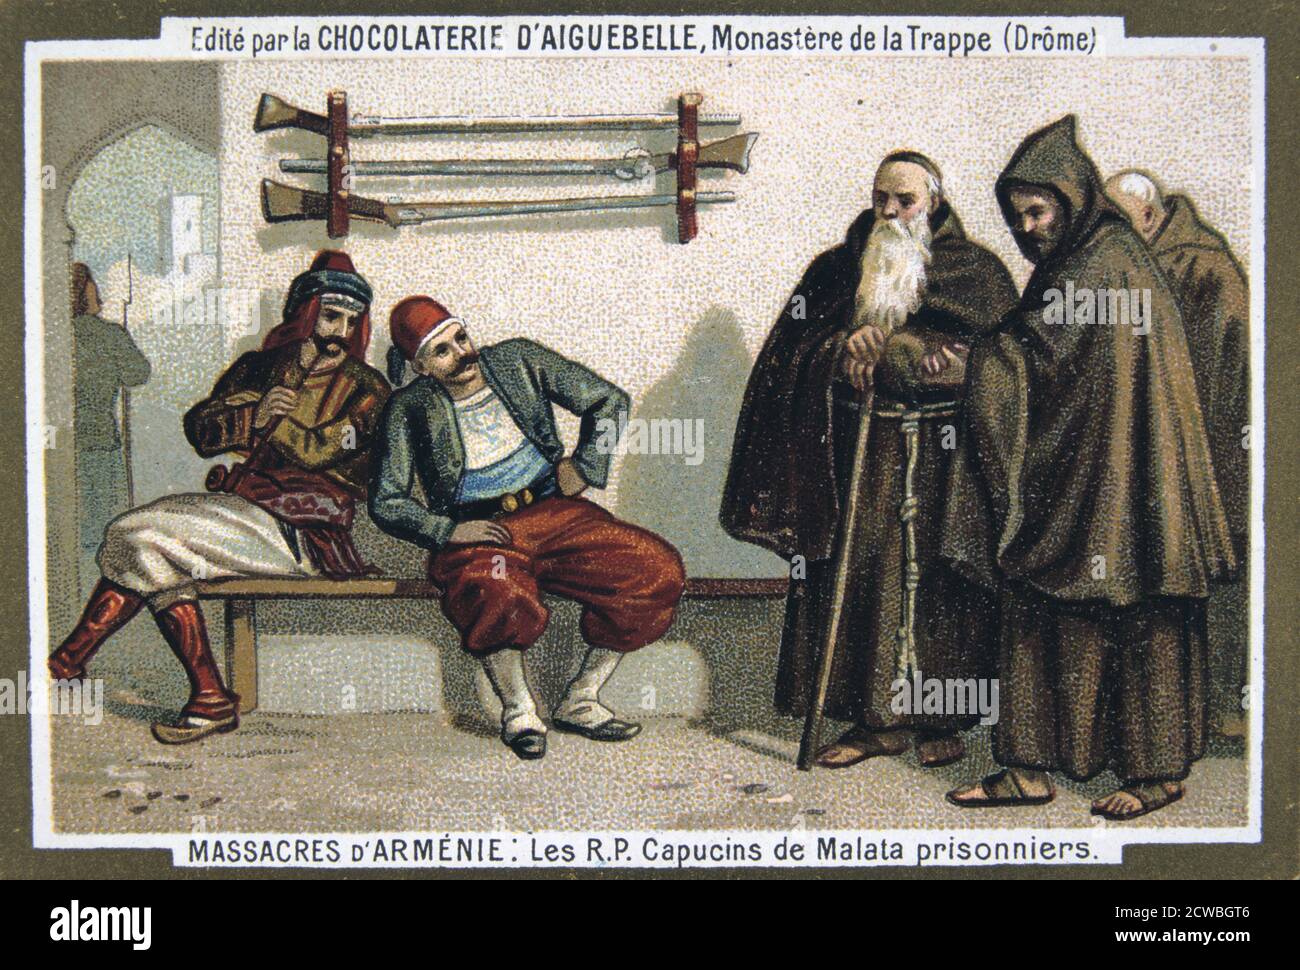 The capuchin monks of Malata taken prisoner, 1895. Scene from the Massacres of Armenia card series produced by the chocolate factory at the Monastery of Aiguebelle. Stock Photo